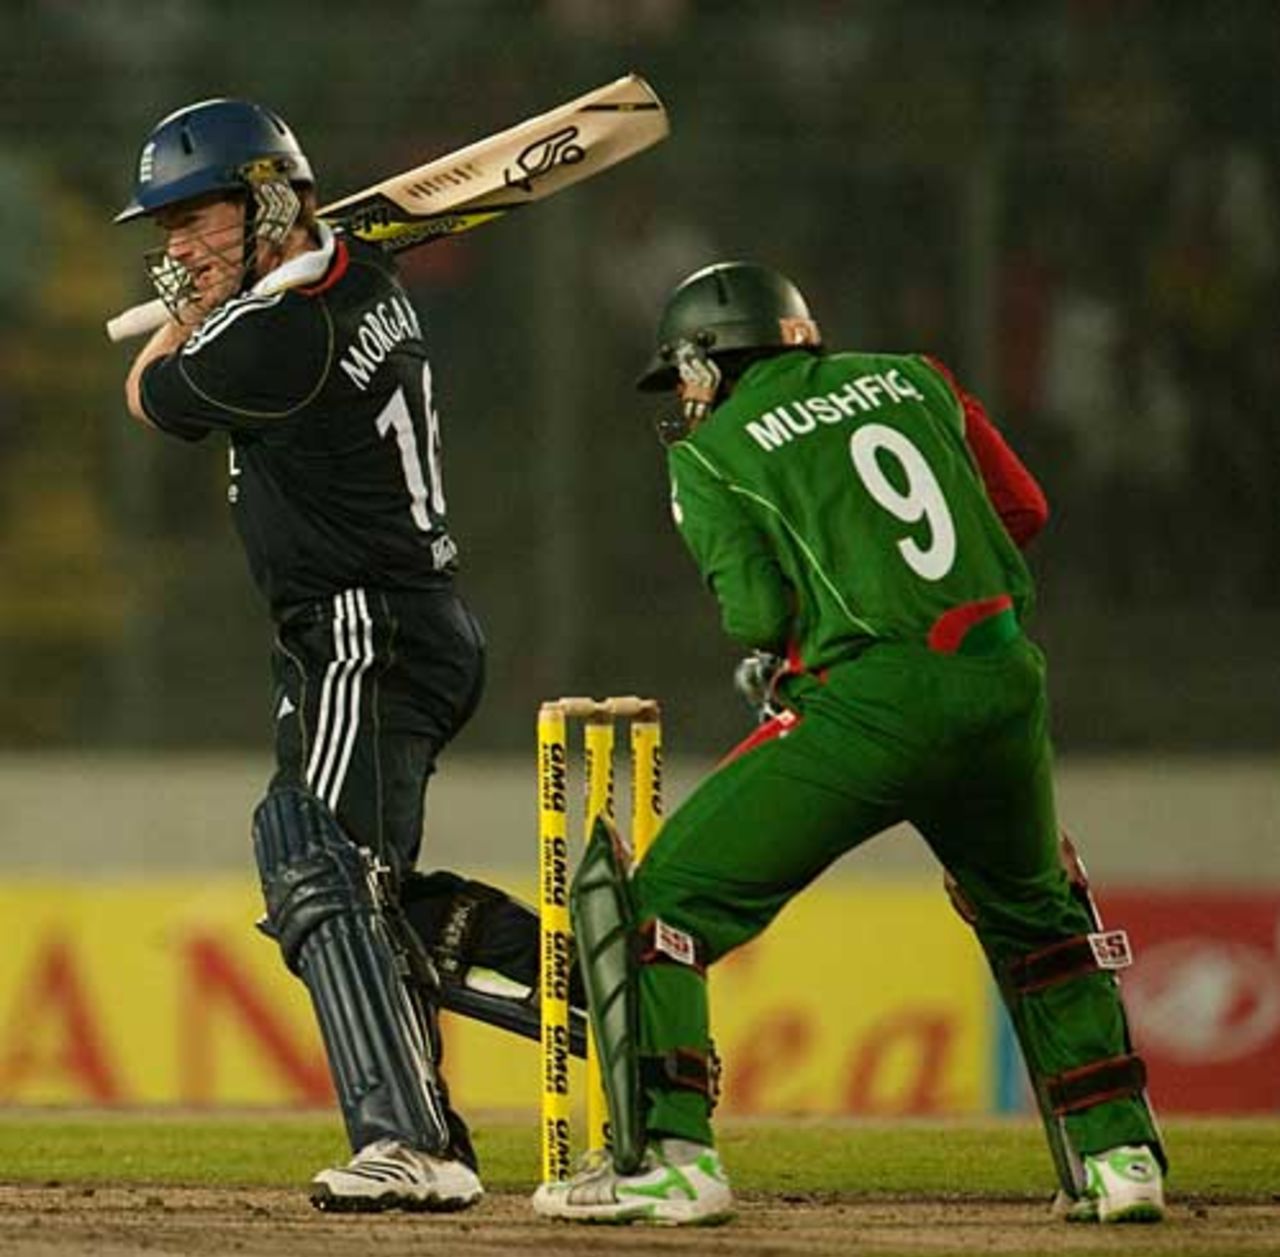 Eoin Morgan played another controlled innings in the middle order, Bangladesh v England, 2nd ODI, Dhaka, March 2, 2010